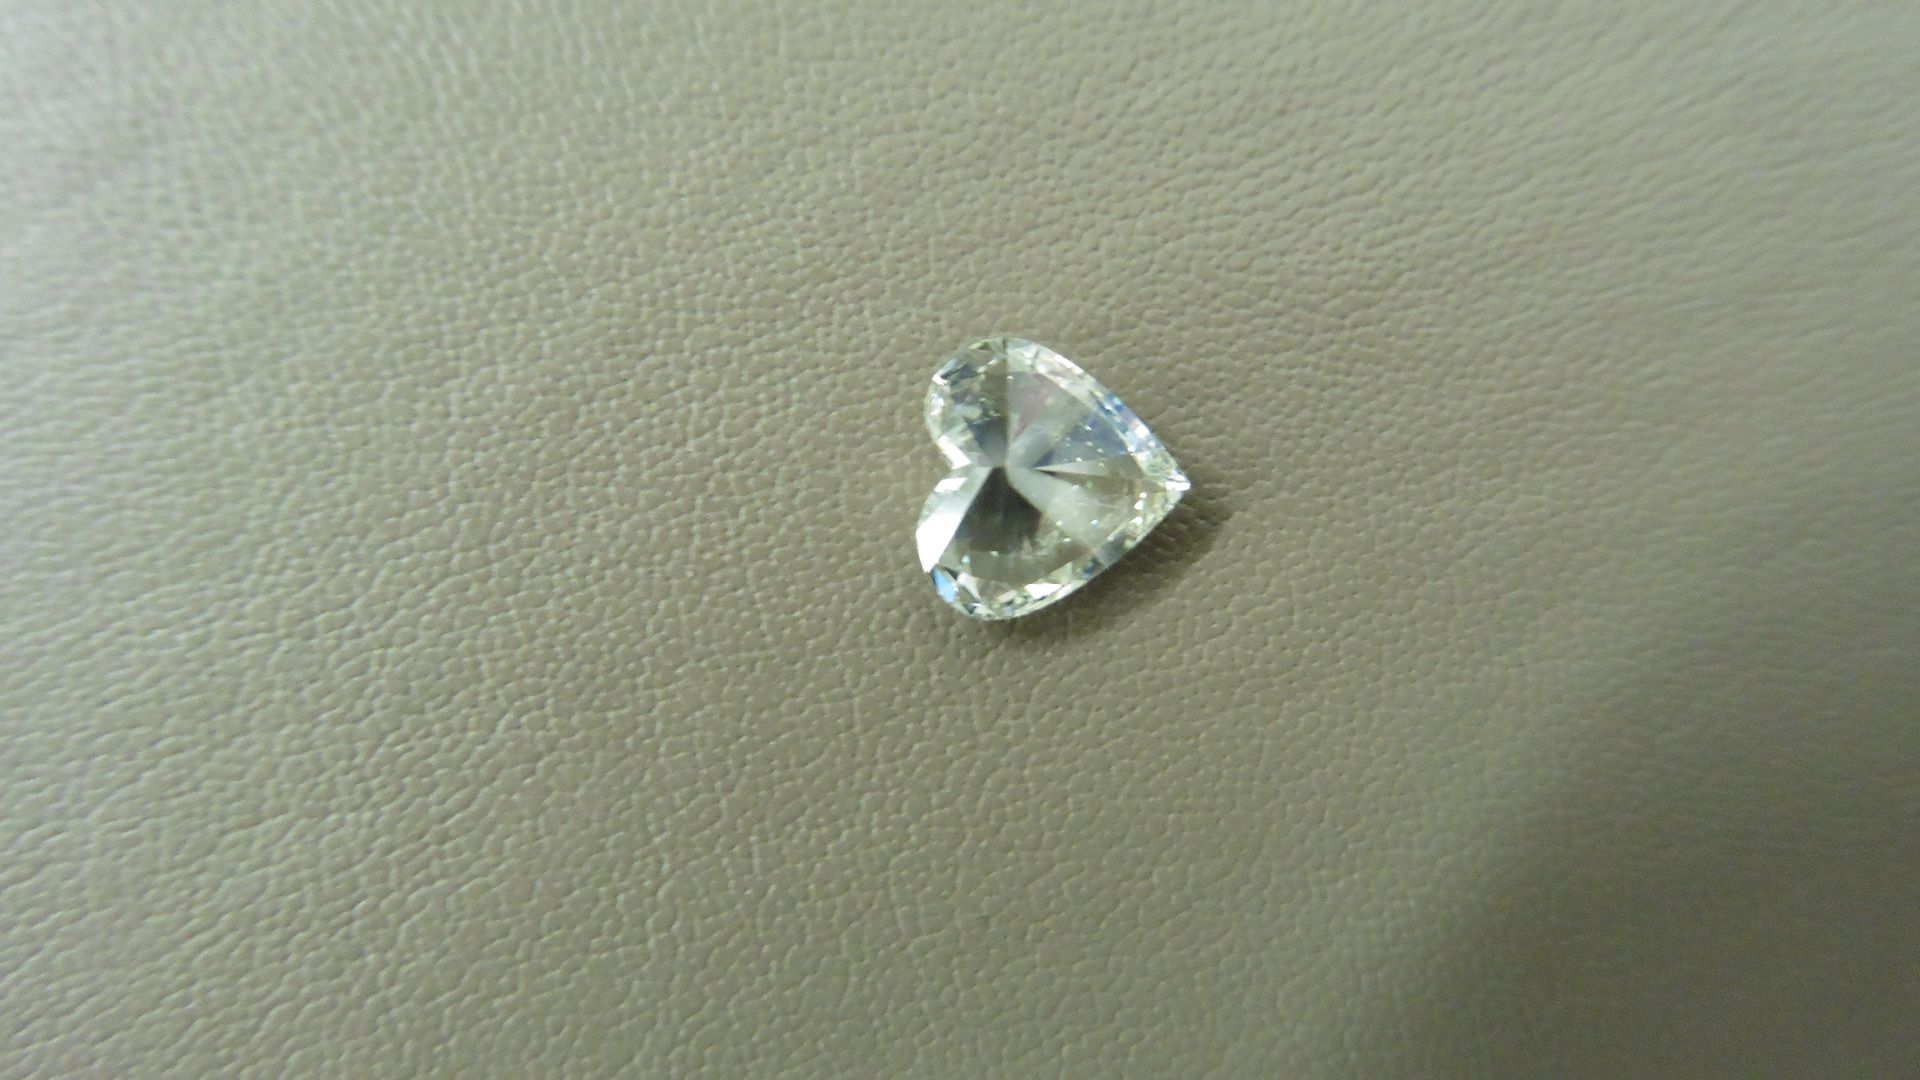 0.91ct heart shaped diamond, loose stone.J colour and Si clarity. No certification but can be done - Bild 4 aus 6